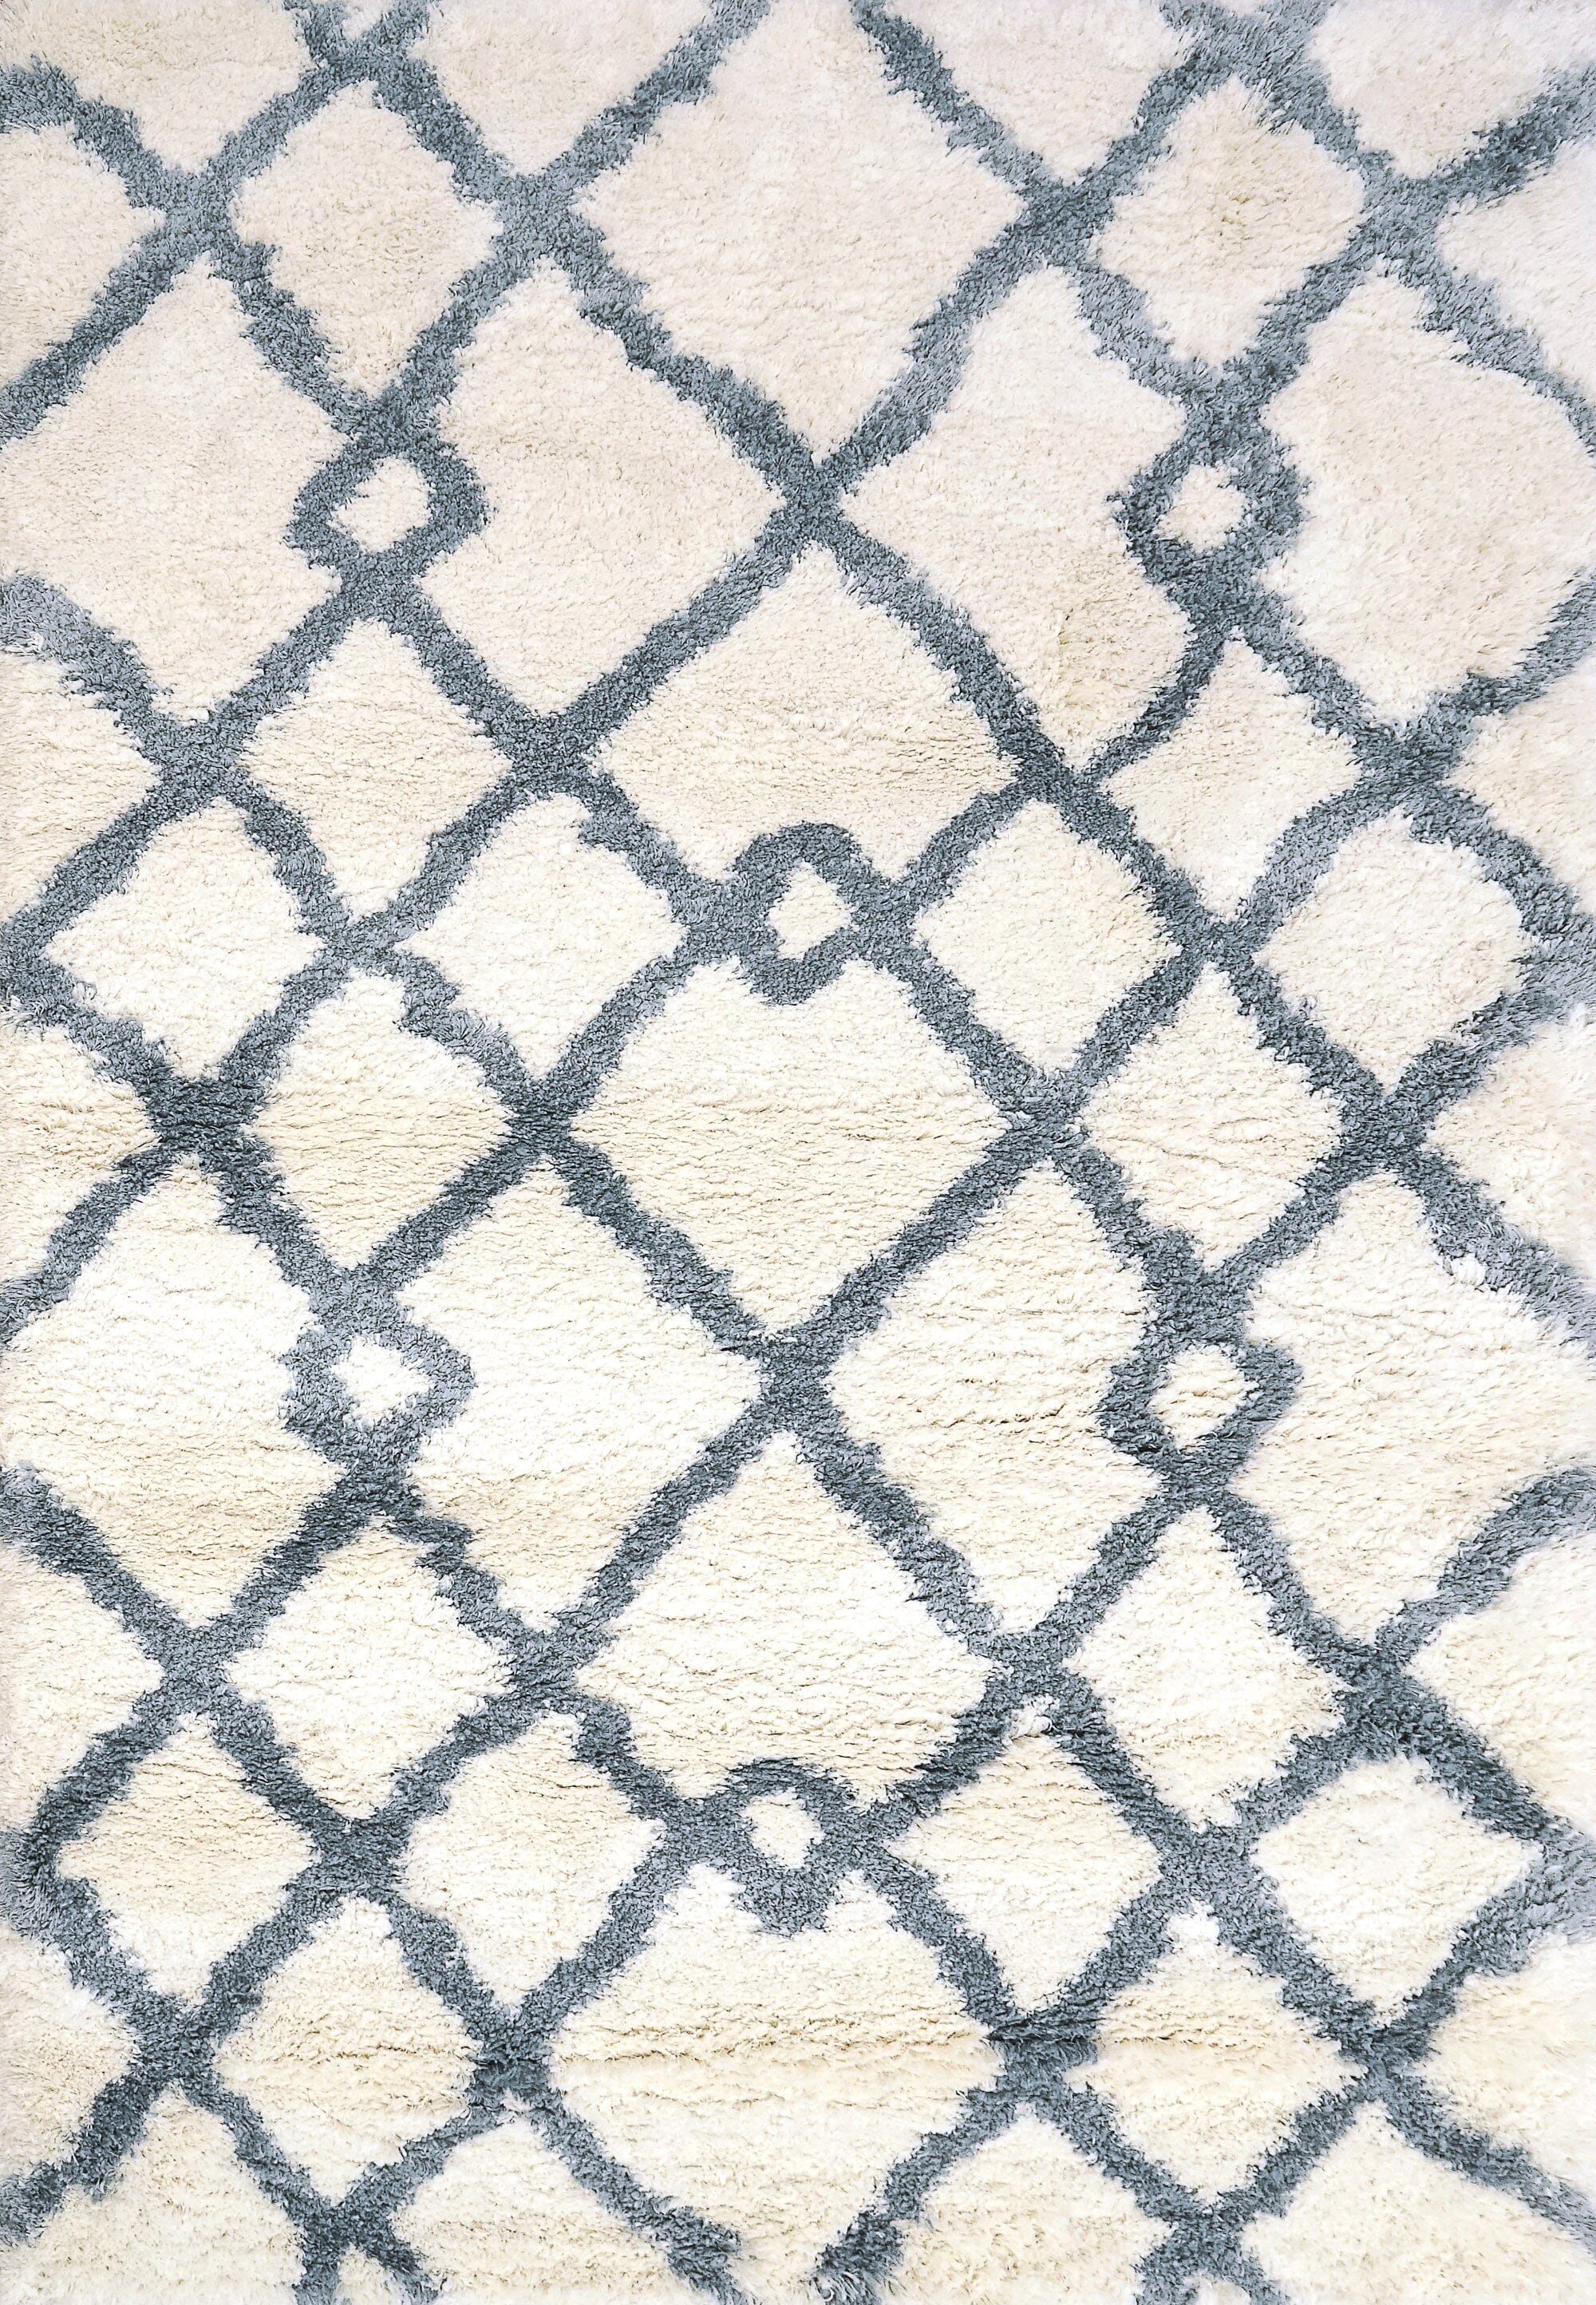 Anne Klein Ivory/Blue The Printed Posh Contemporary Rug Collection